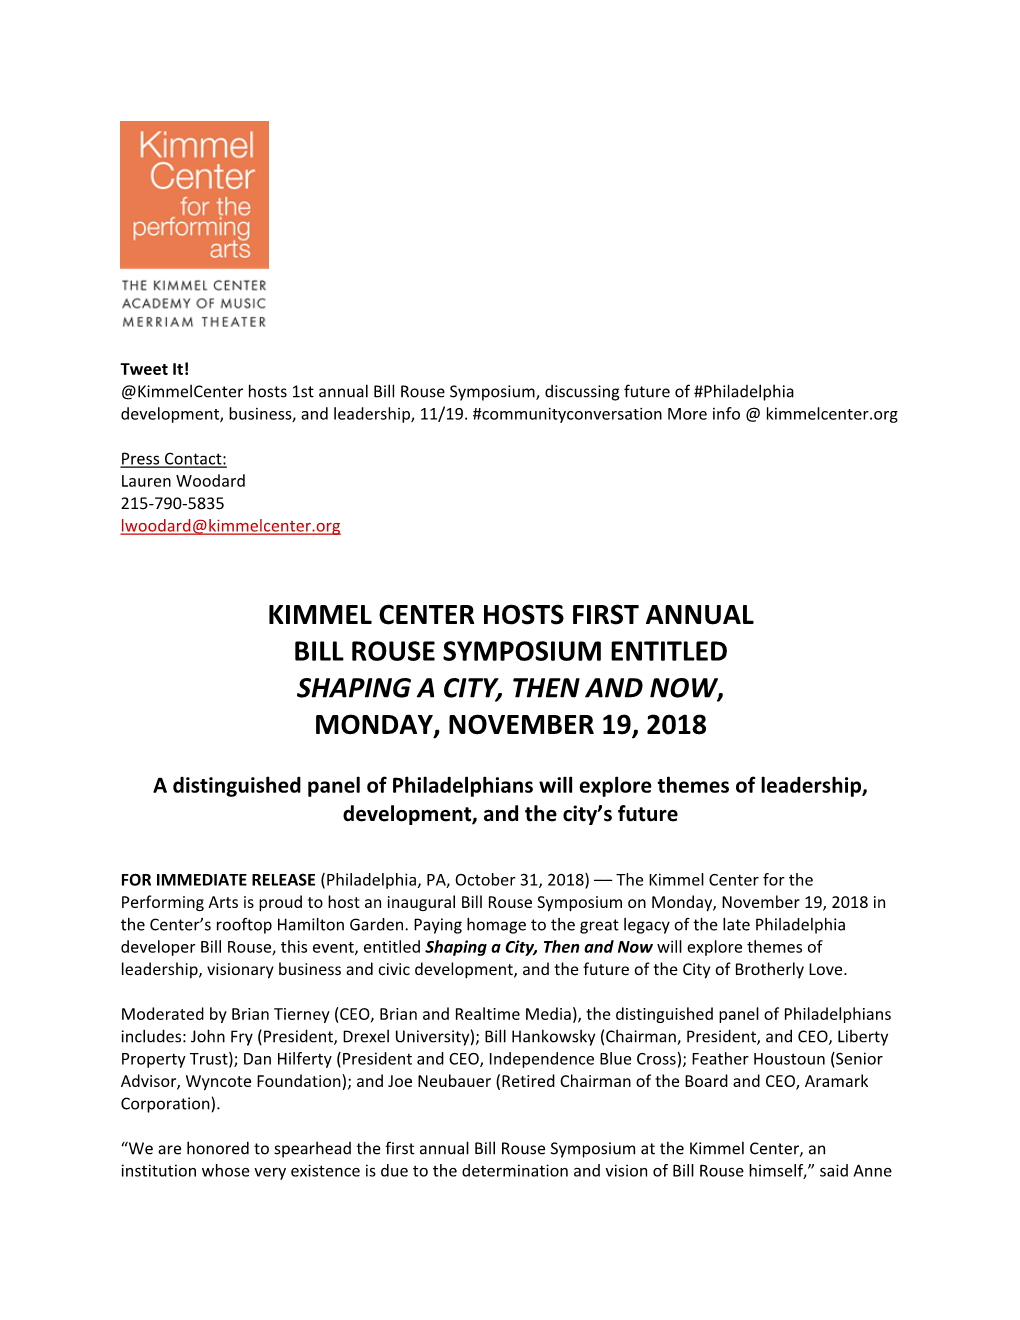 Kimmel Center Hosts First Annual Bill Rouse Symposium Entitled Shaping a City, Then and Now, Monday, November 19, 2018